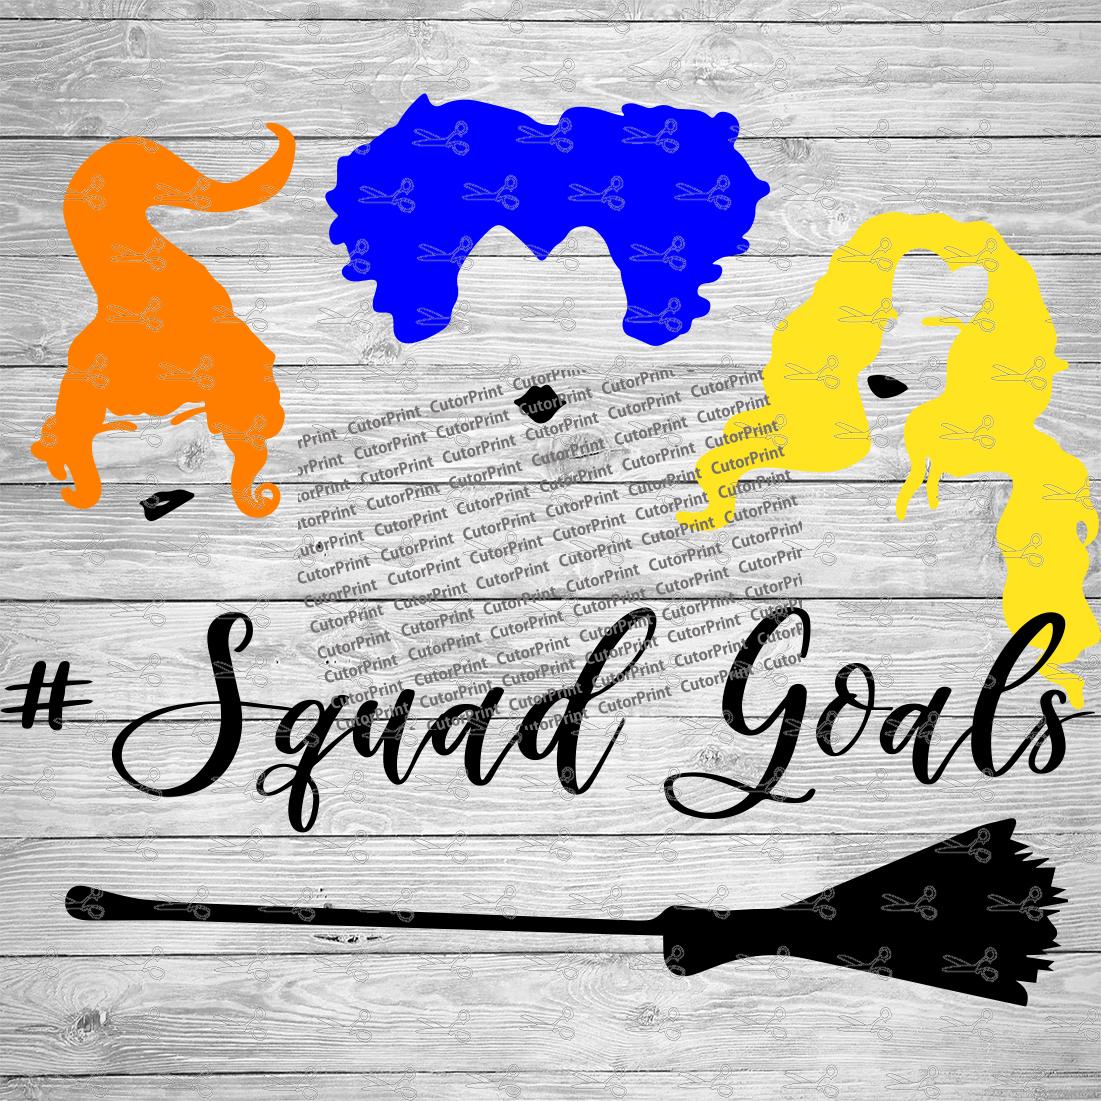 Download Hocus Pocus Witch Squad Goals Svg Eps Png Files Digital Download Files For Cricut Silhouette Cameo And More